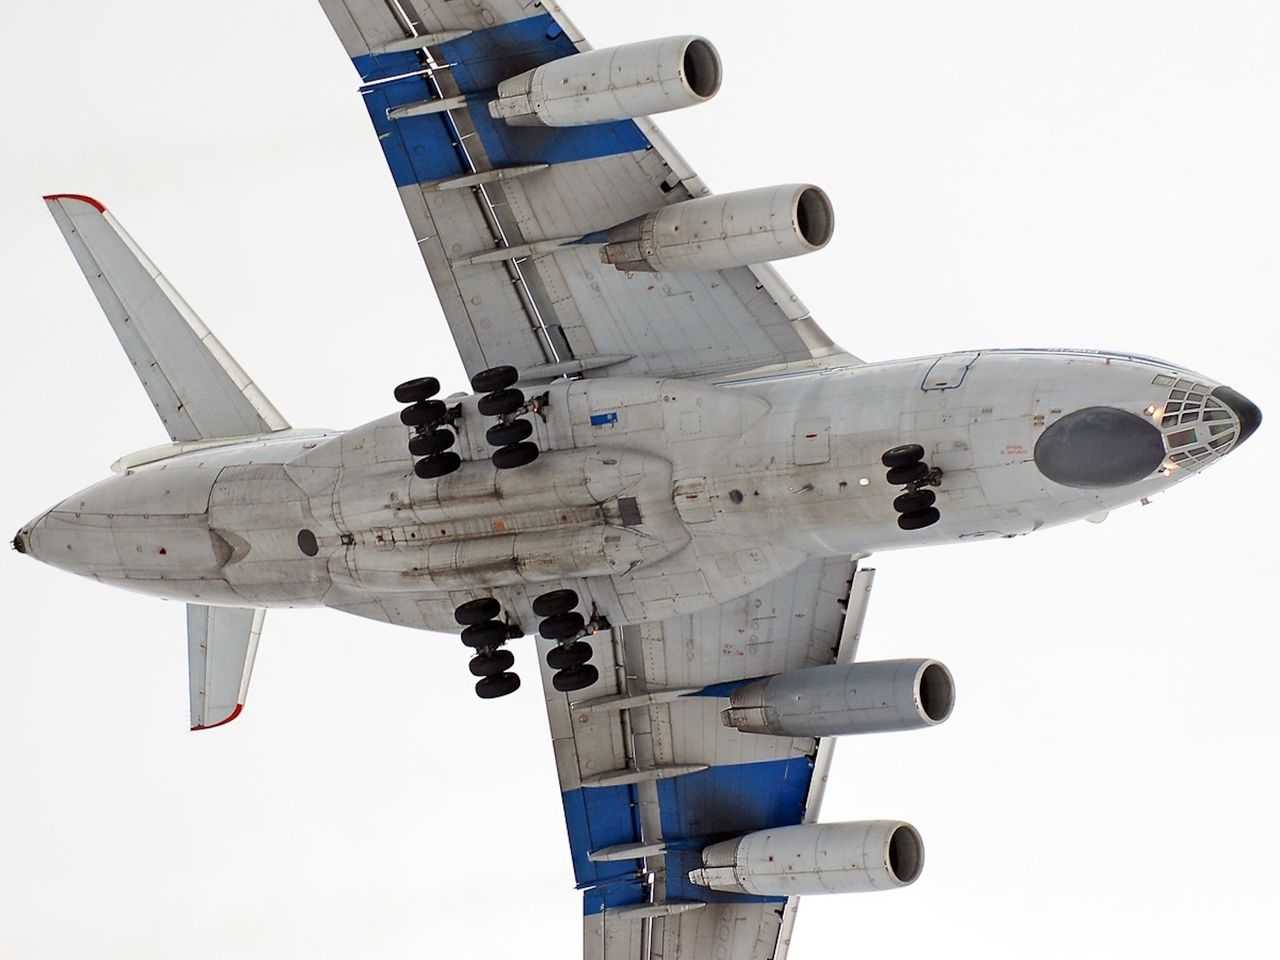 Russian aviation woes: Multiple IL-76 crashes underscore systemic issues